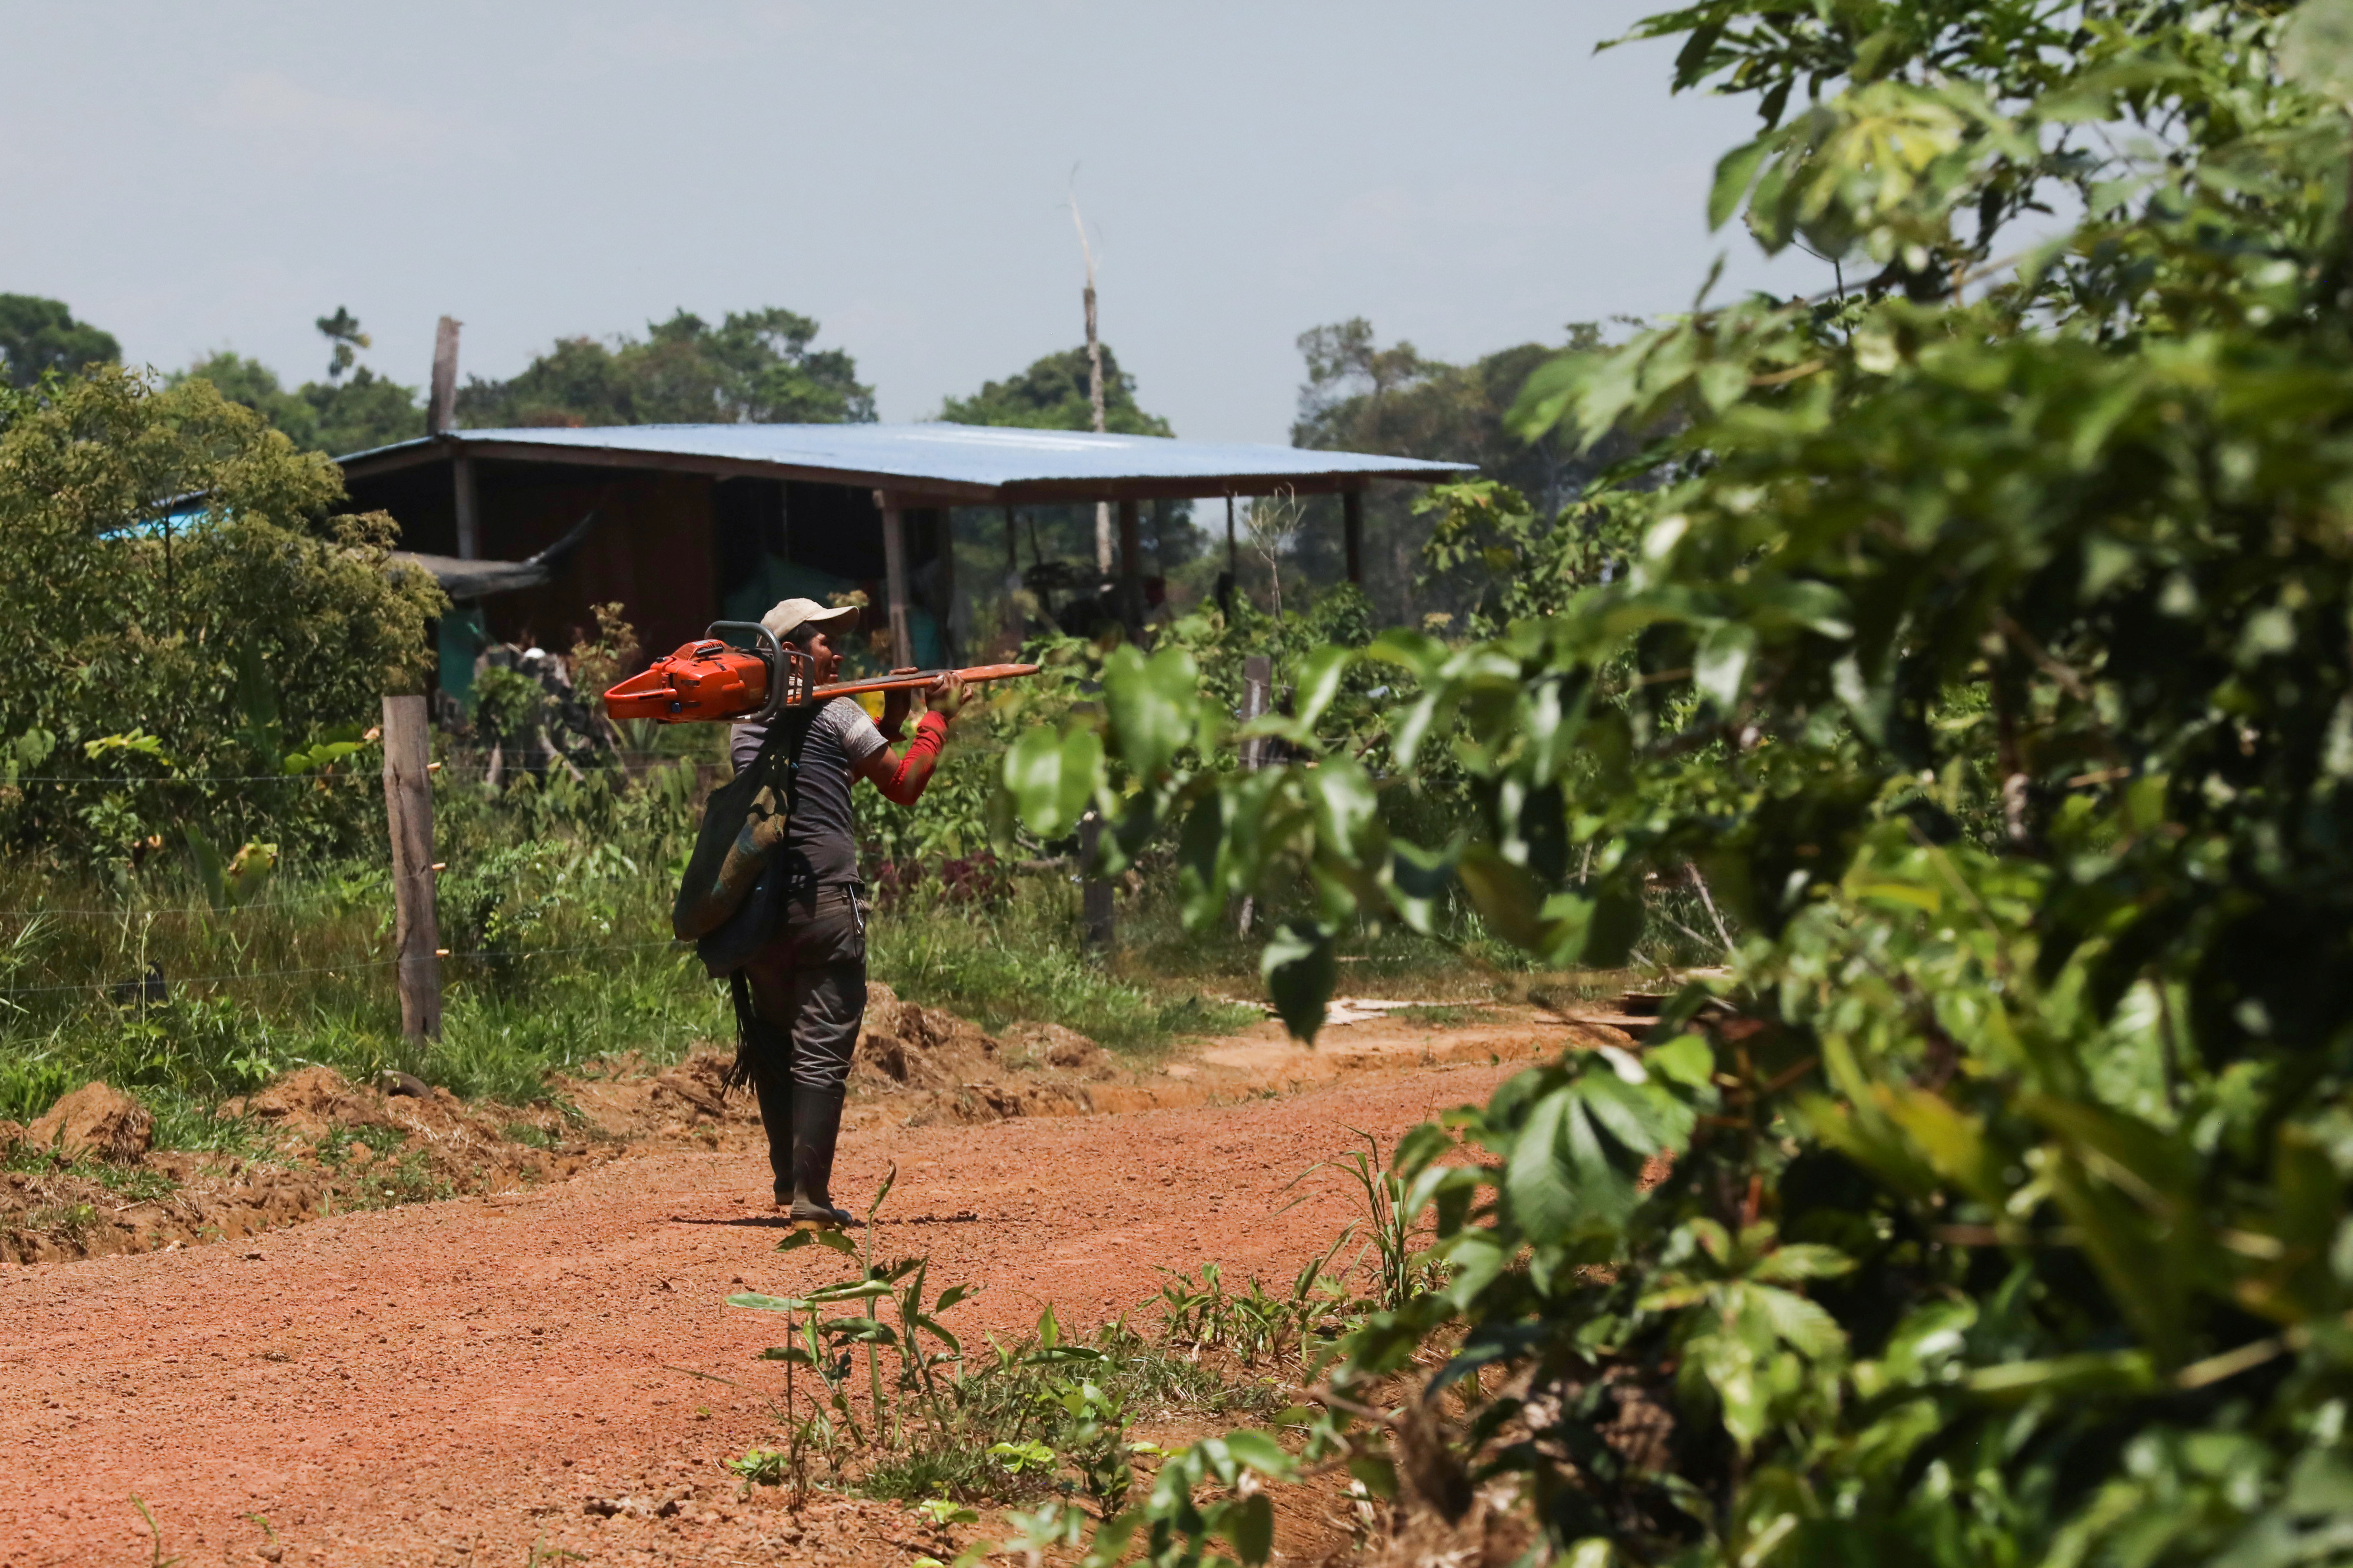 A man walks carrying a chainsaw in the middle of an illegal road made during the deforestation of the Yari plains, in Caqueta